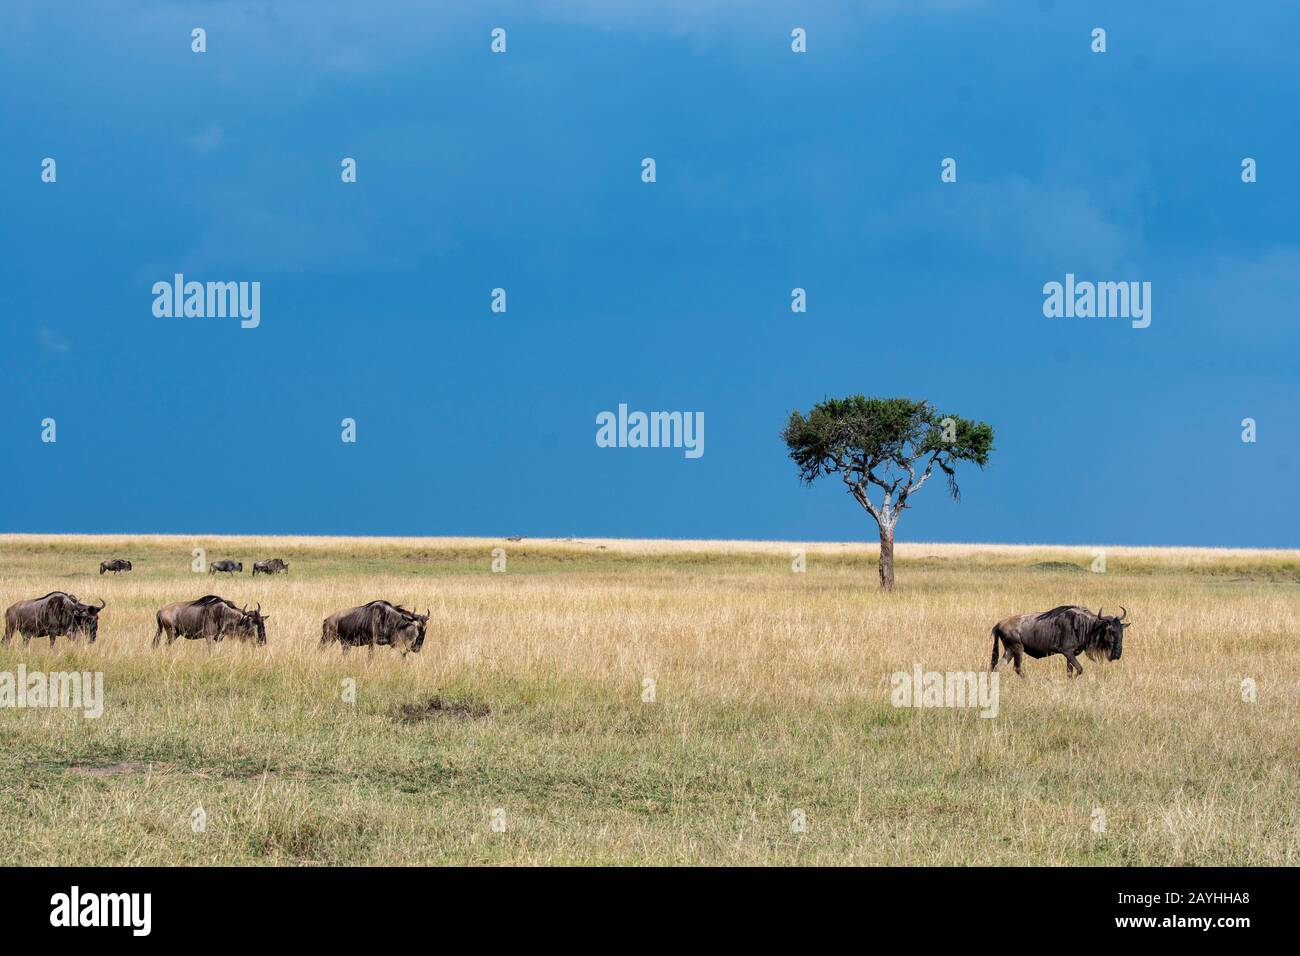 Wildebeests, also called gnus or wildebai, during their annual migration in the grassland of the Masai Mara National Reserve in Kenya. Stock Photo